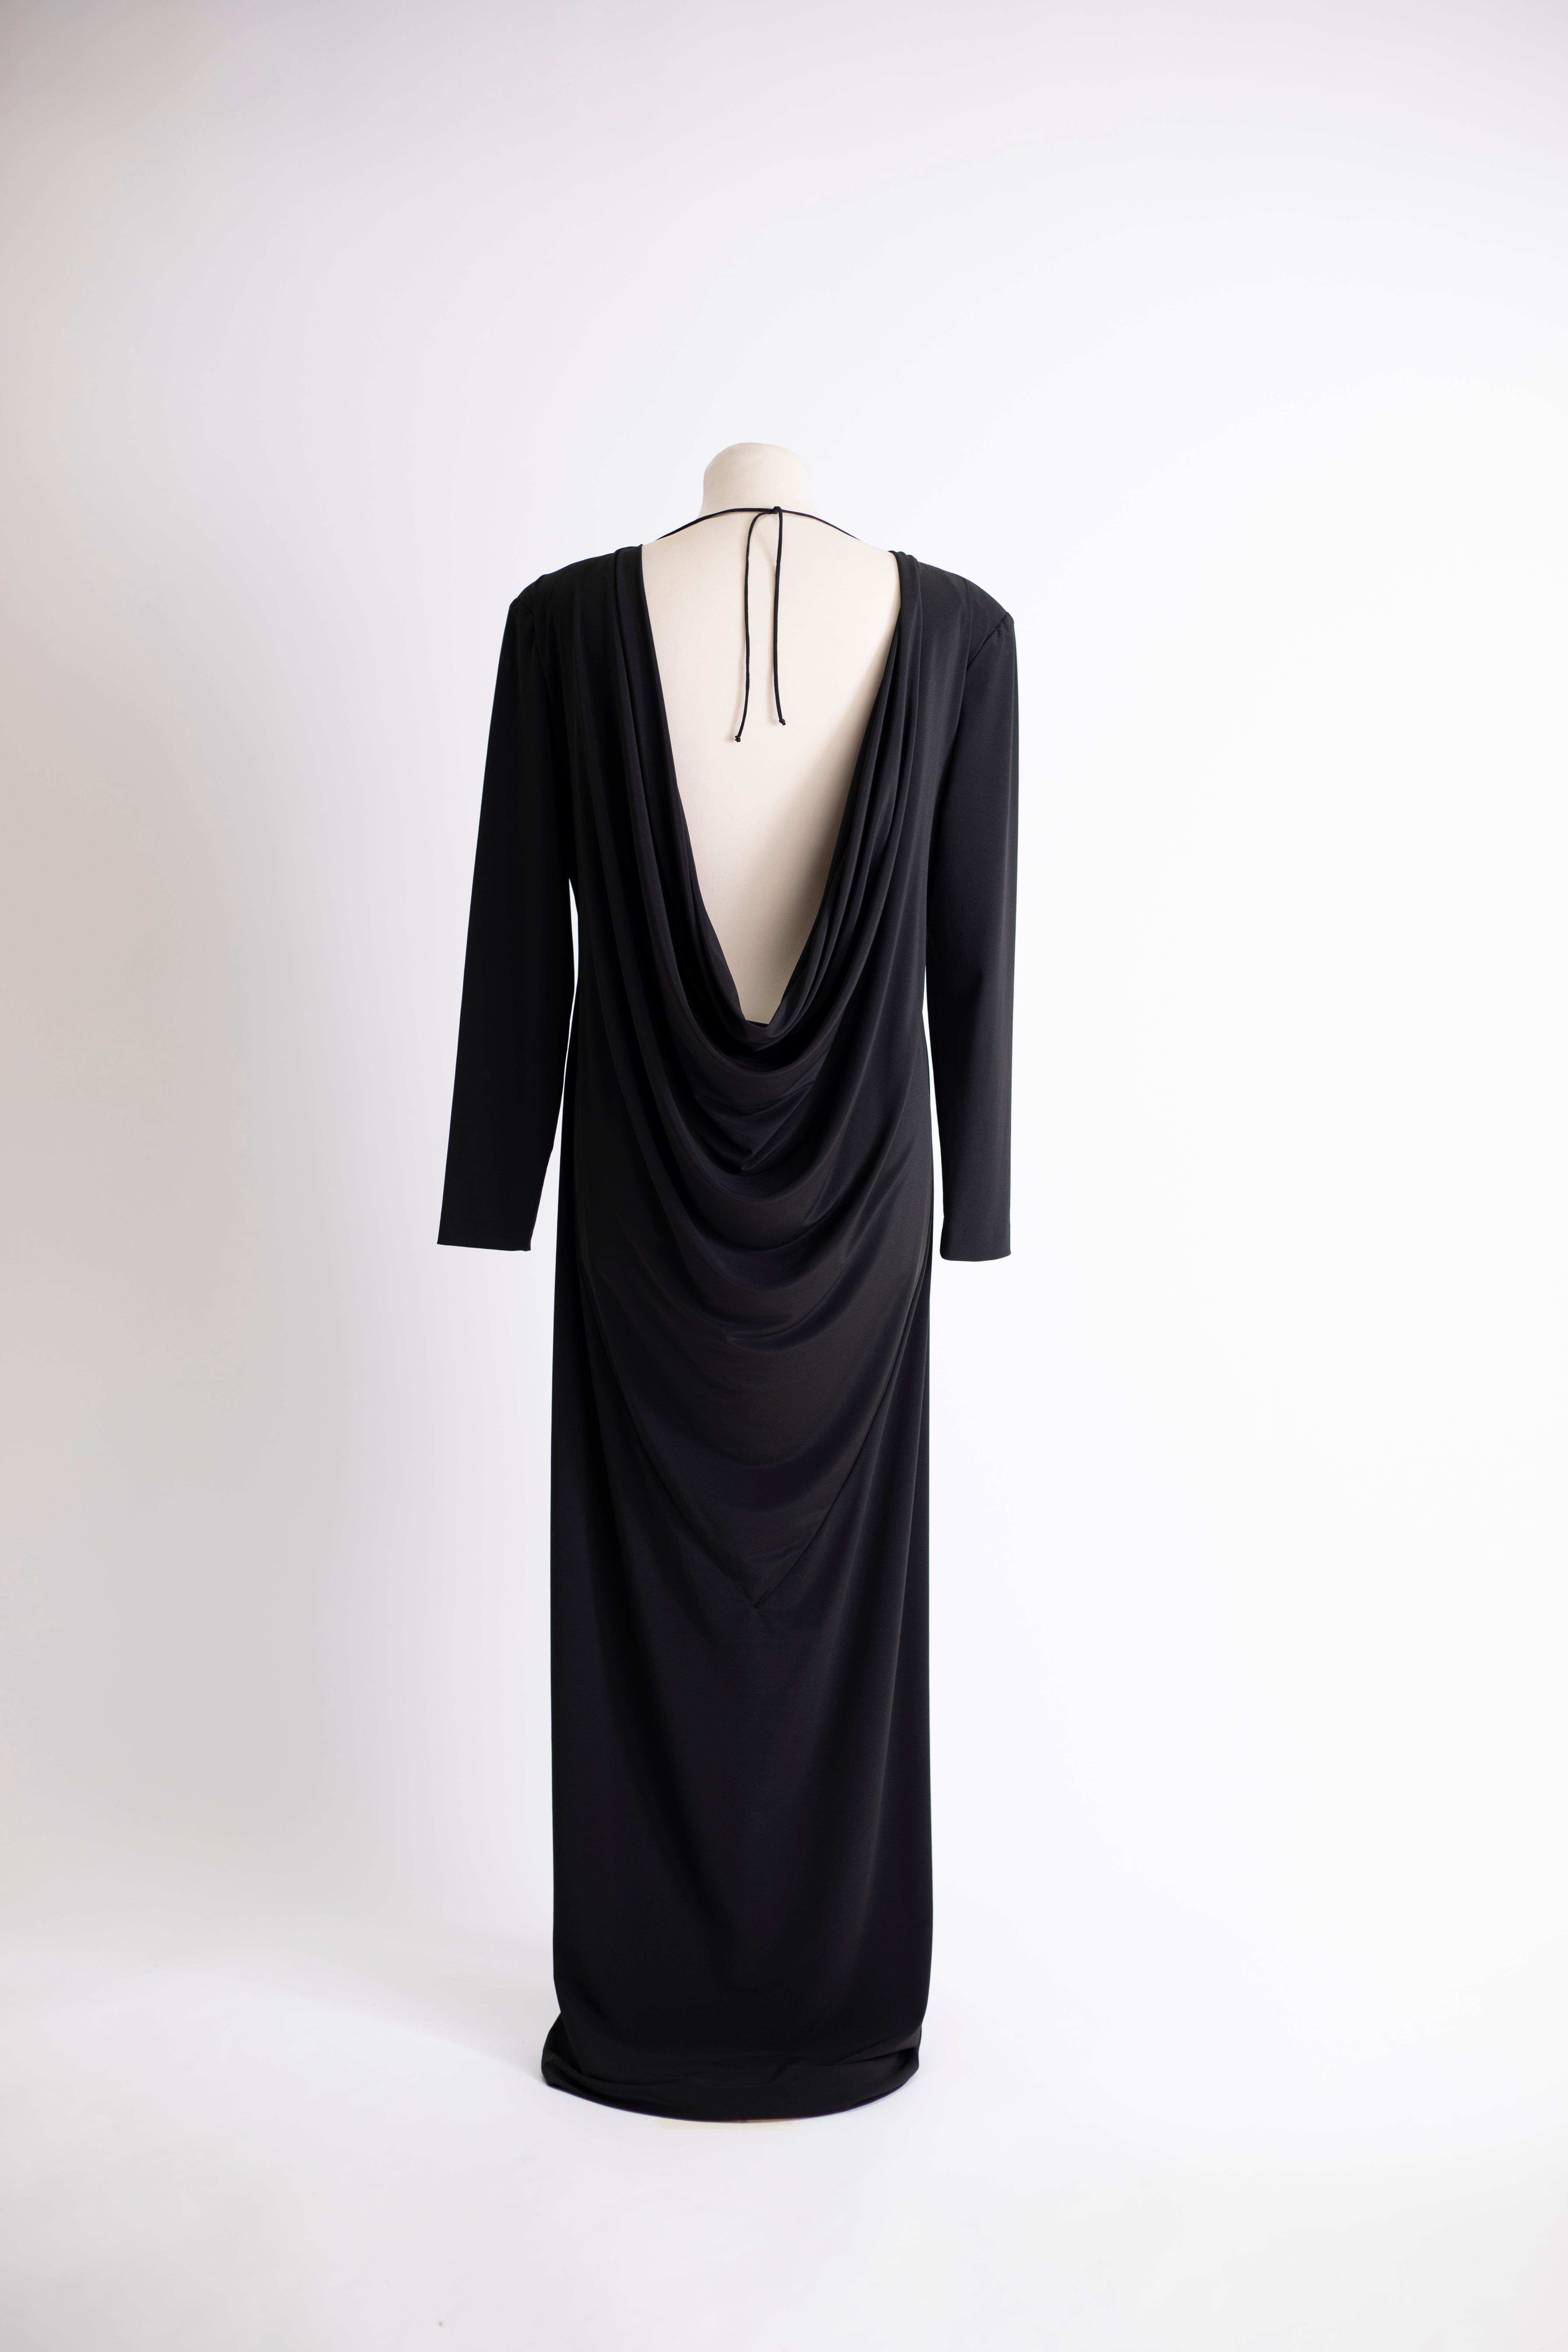 1980s Dimitri Kritsas long black dress In Excellent Condition For Sale In Milano, IT